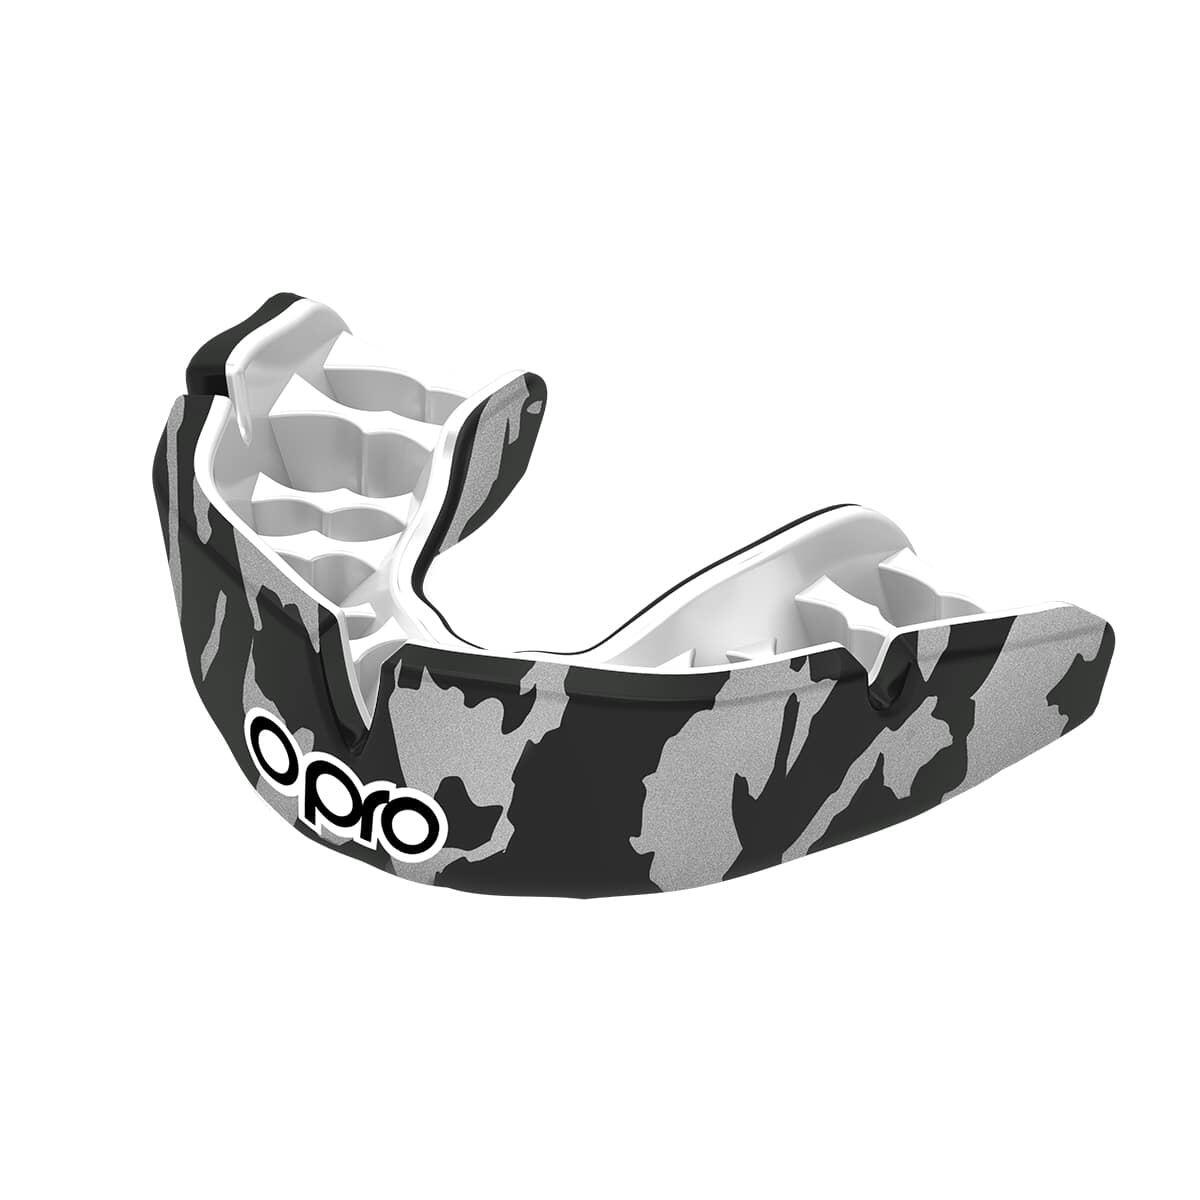 OPRO Black/White/Silver Opro Instant Custom-Fit Camo Mouth Guard